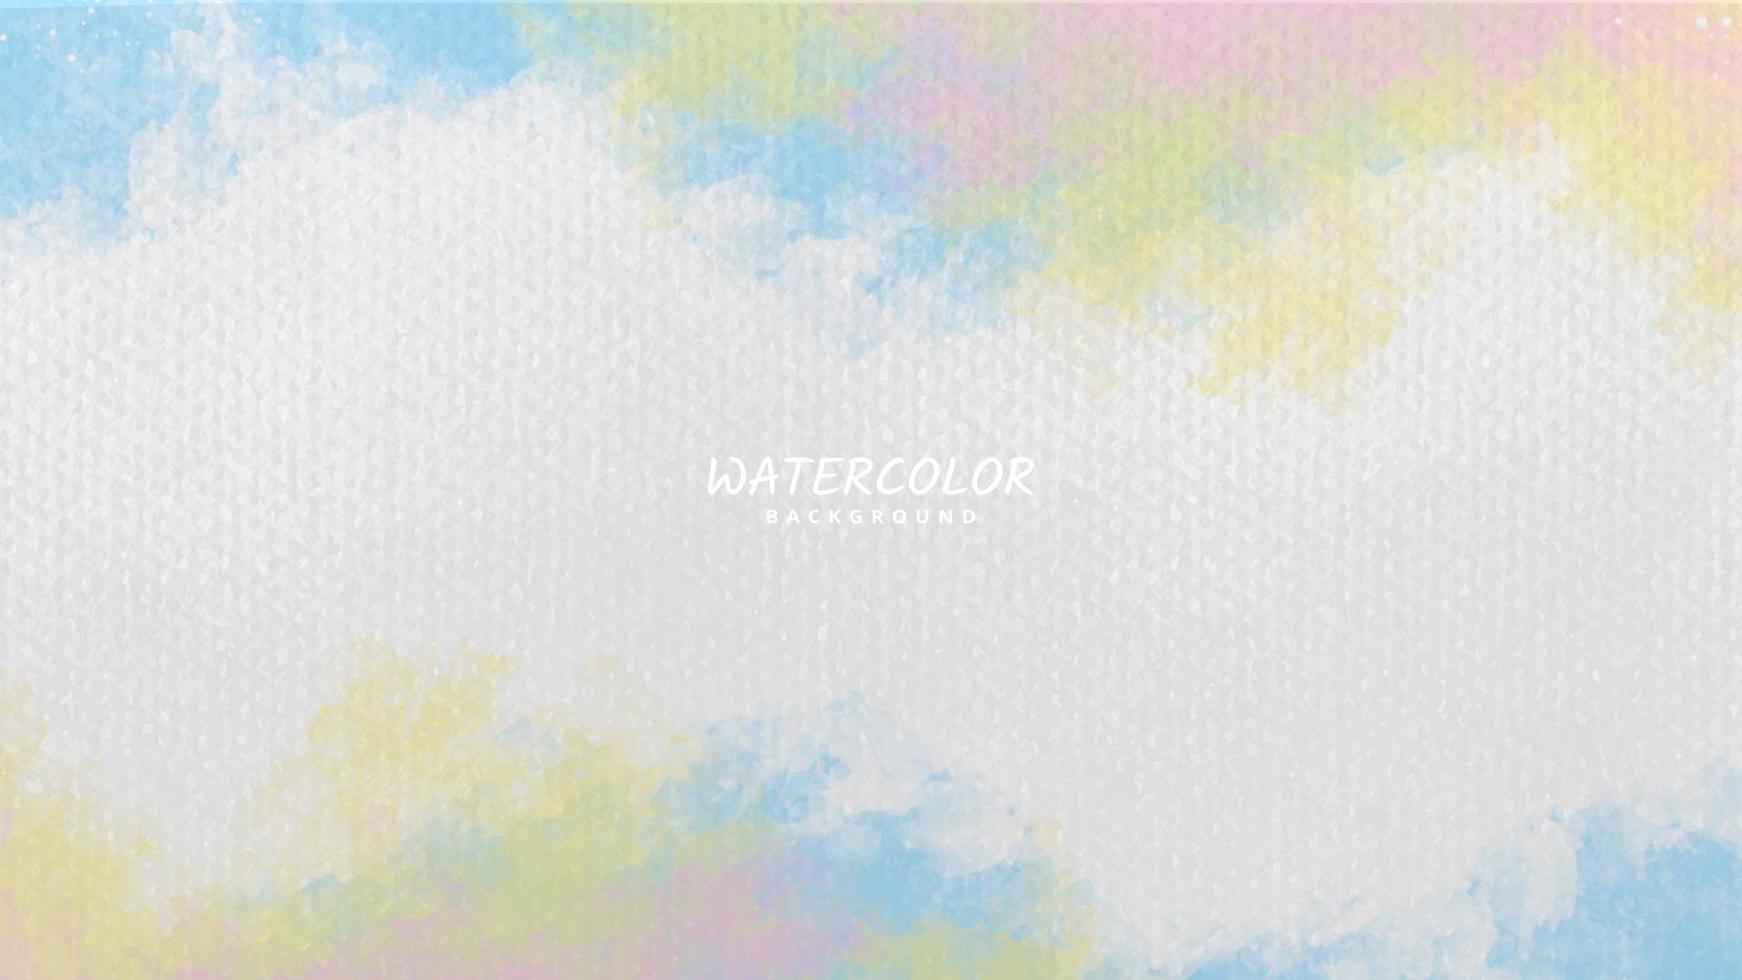 watercolor background with paper texture and white space for text vector